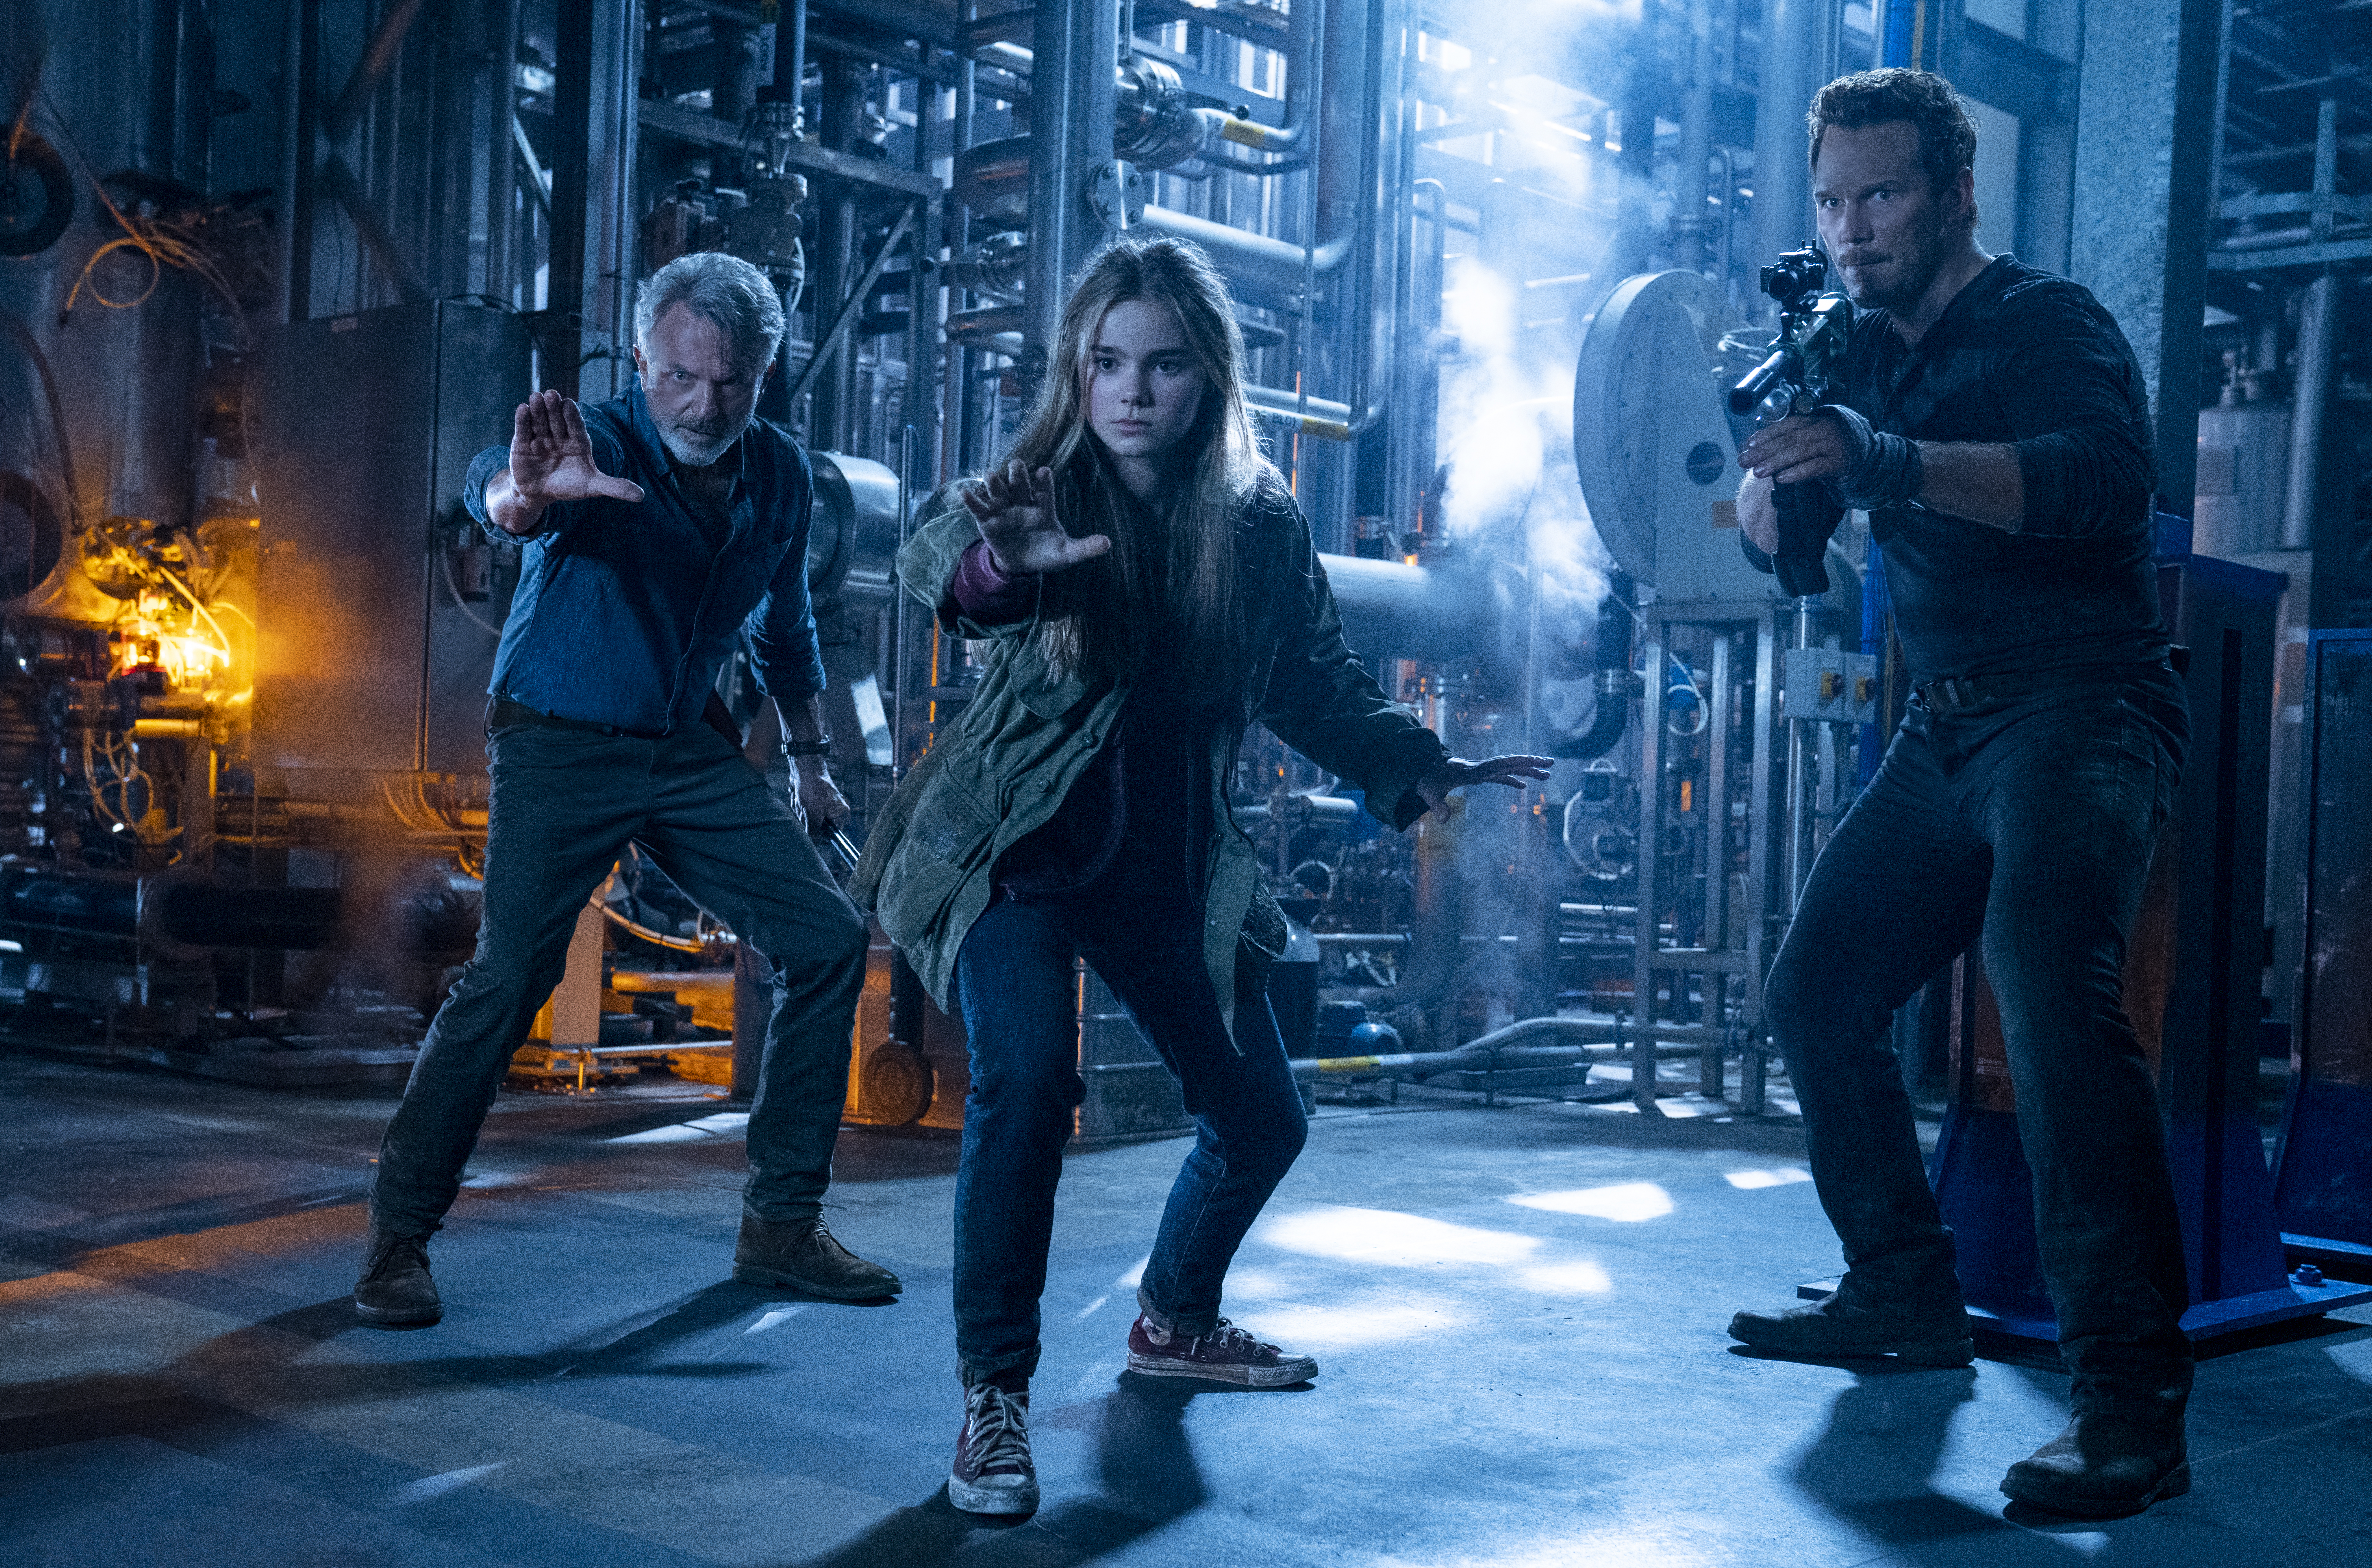 (from left) Dr. Alan Grant (Sam Neill), Maisie Lockwood (Isabella Sermon) and Owen Grady (Chris Pratt) in Jurassic World Dominion, co-written and directed by Colin Trevorrow.